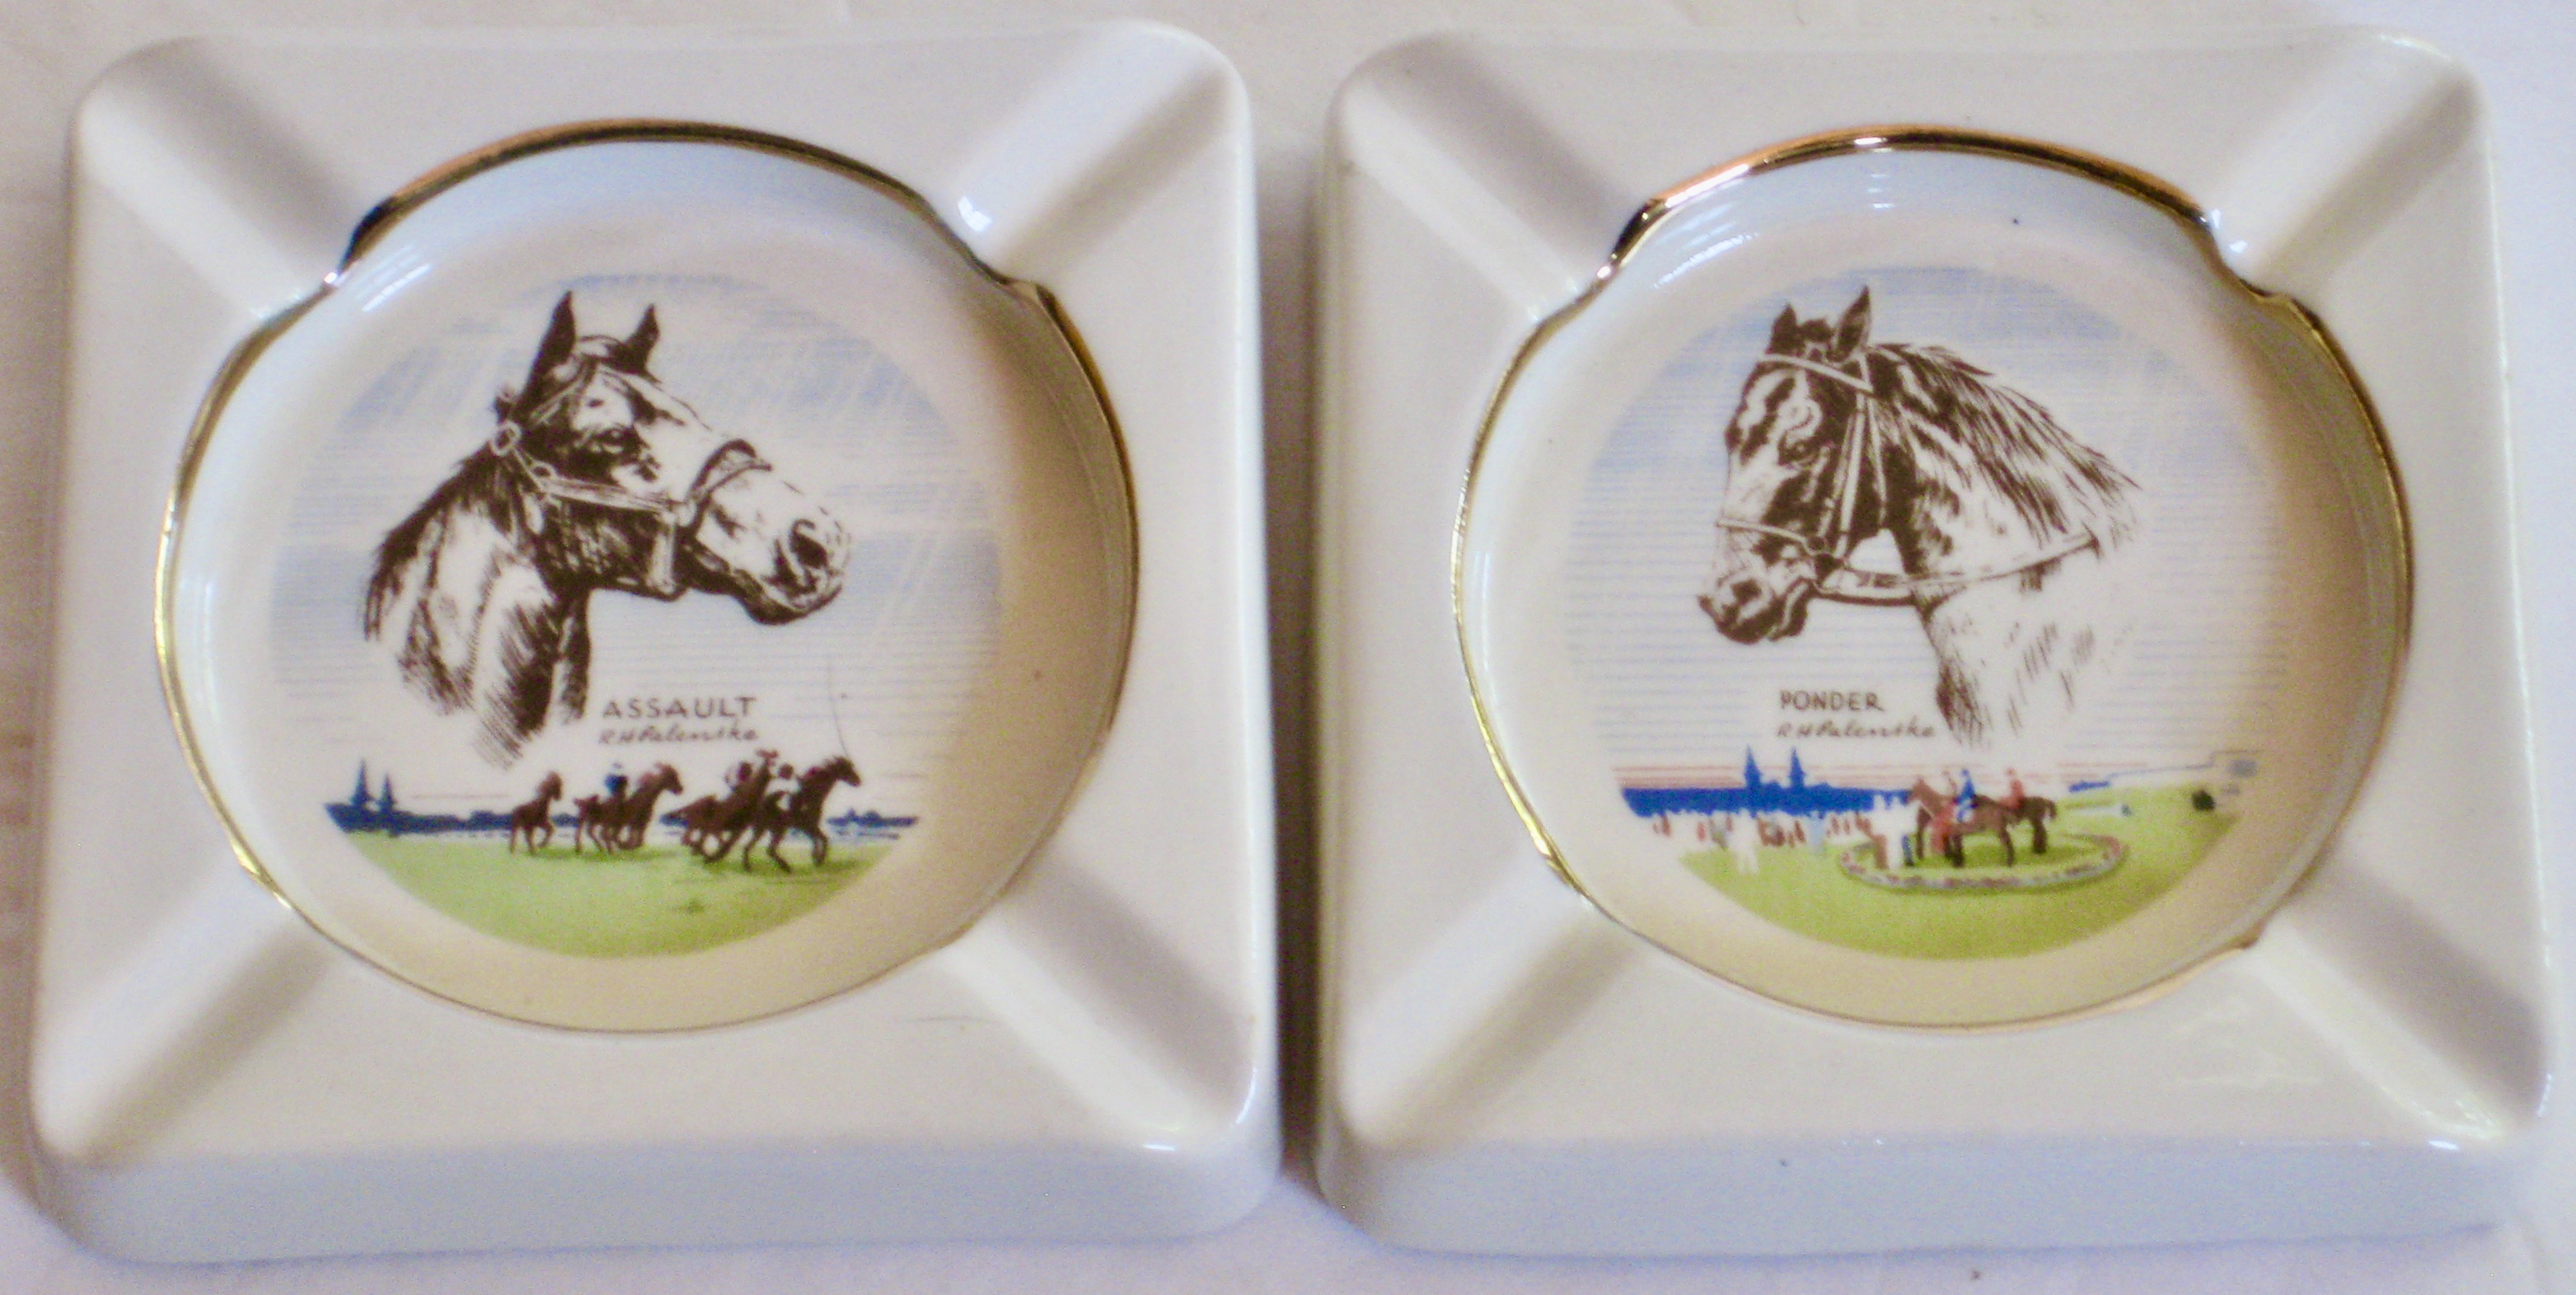 Assault and Ponder Horse Ashtrays S/2~P77658781